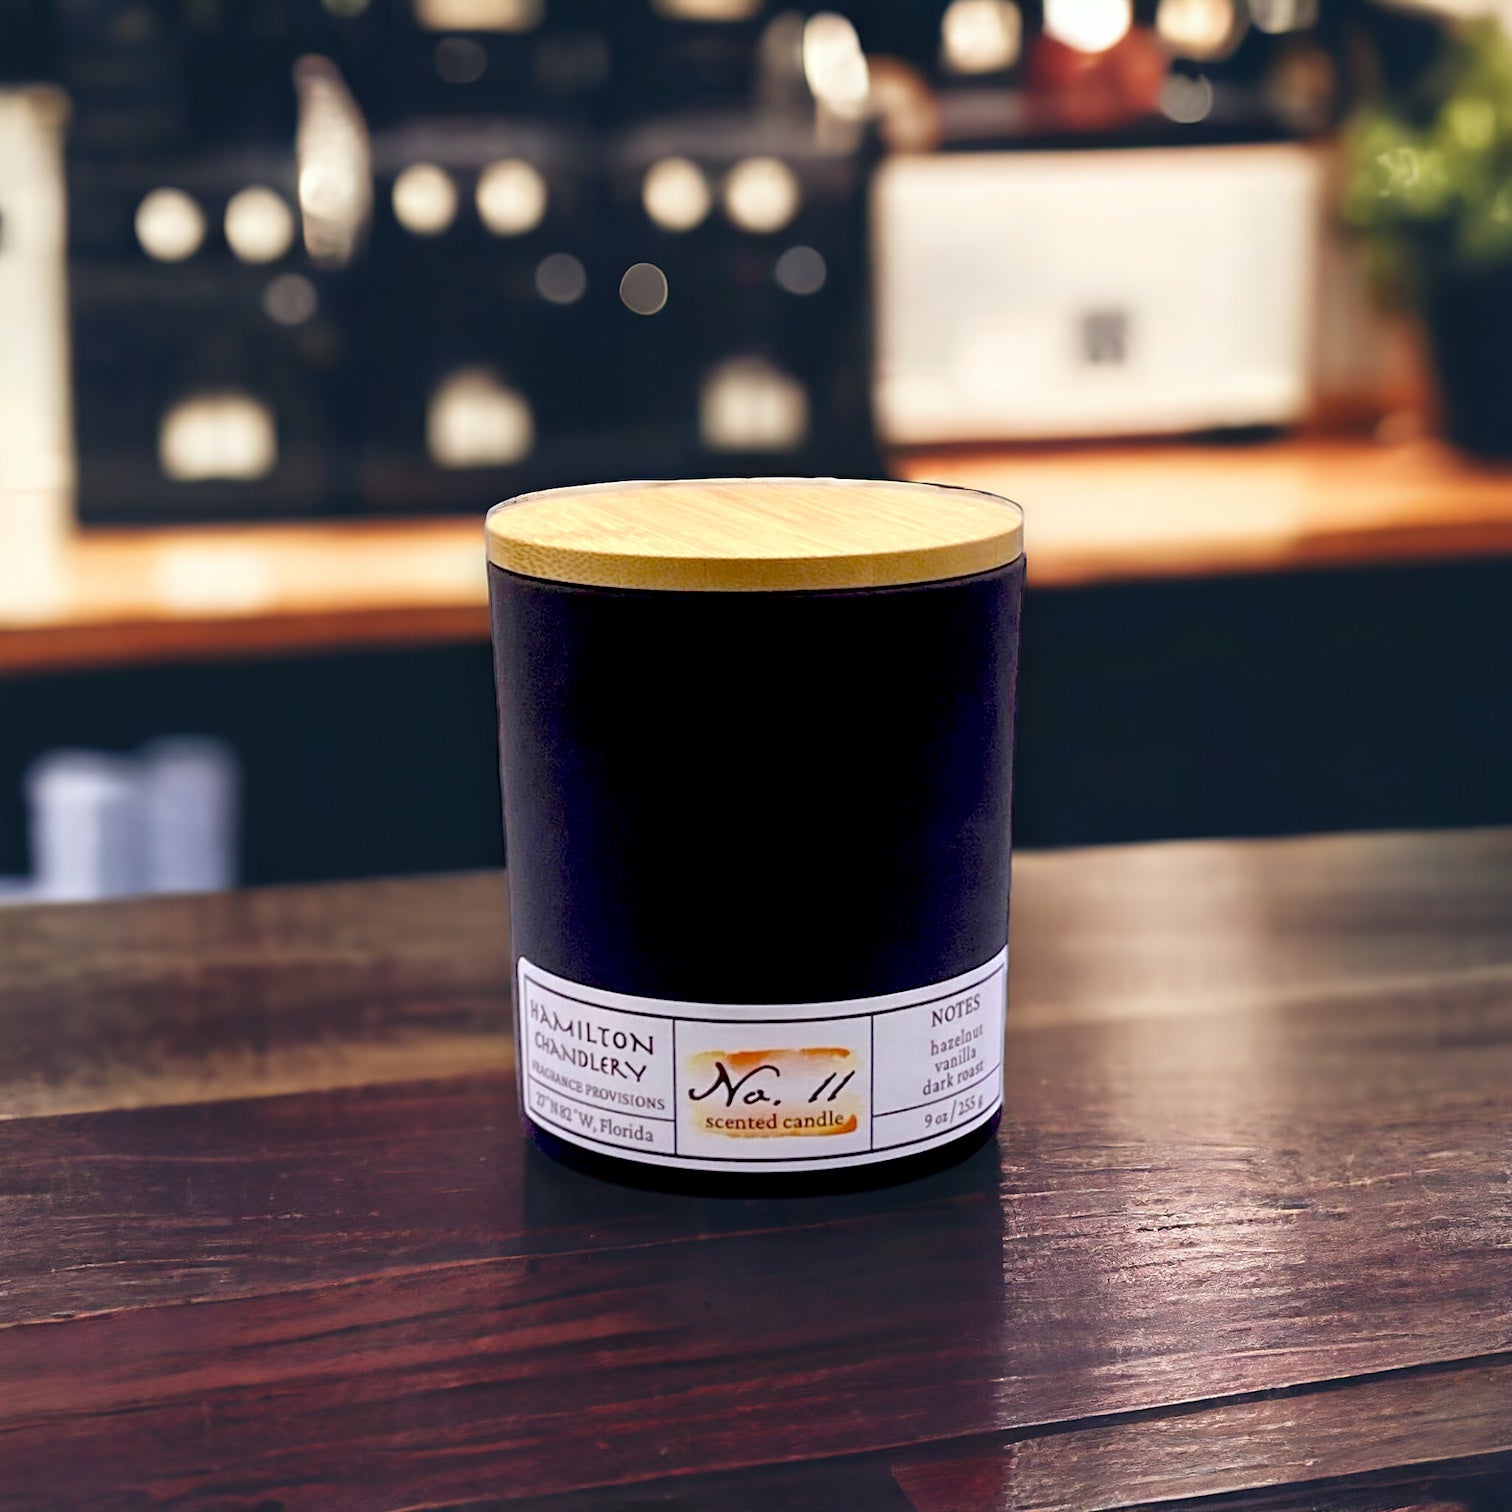 Fragrance No. 11 Blown Glass Candle with Bamboo Lid  in Coffee House Setting | Hamilton Chandlery